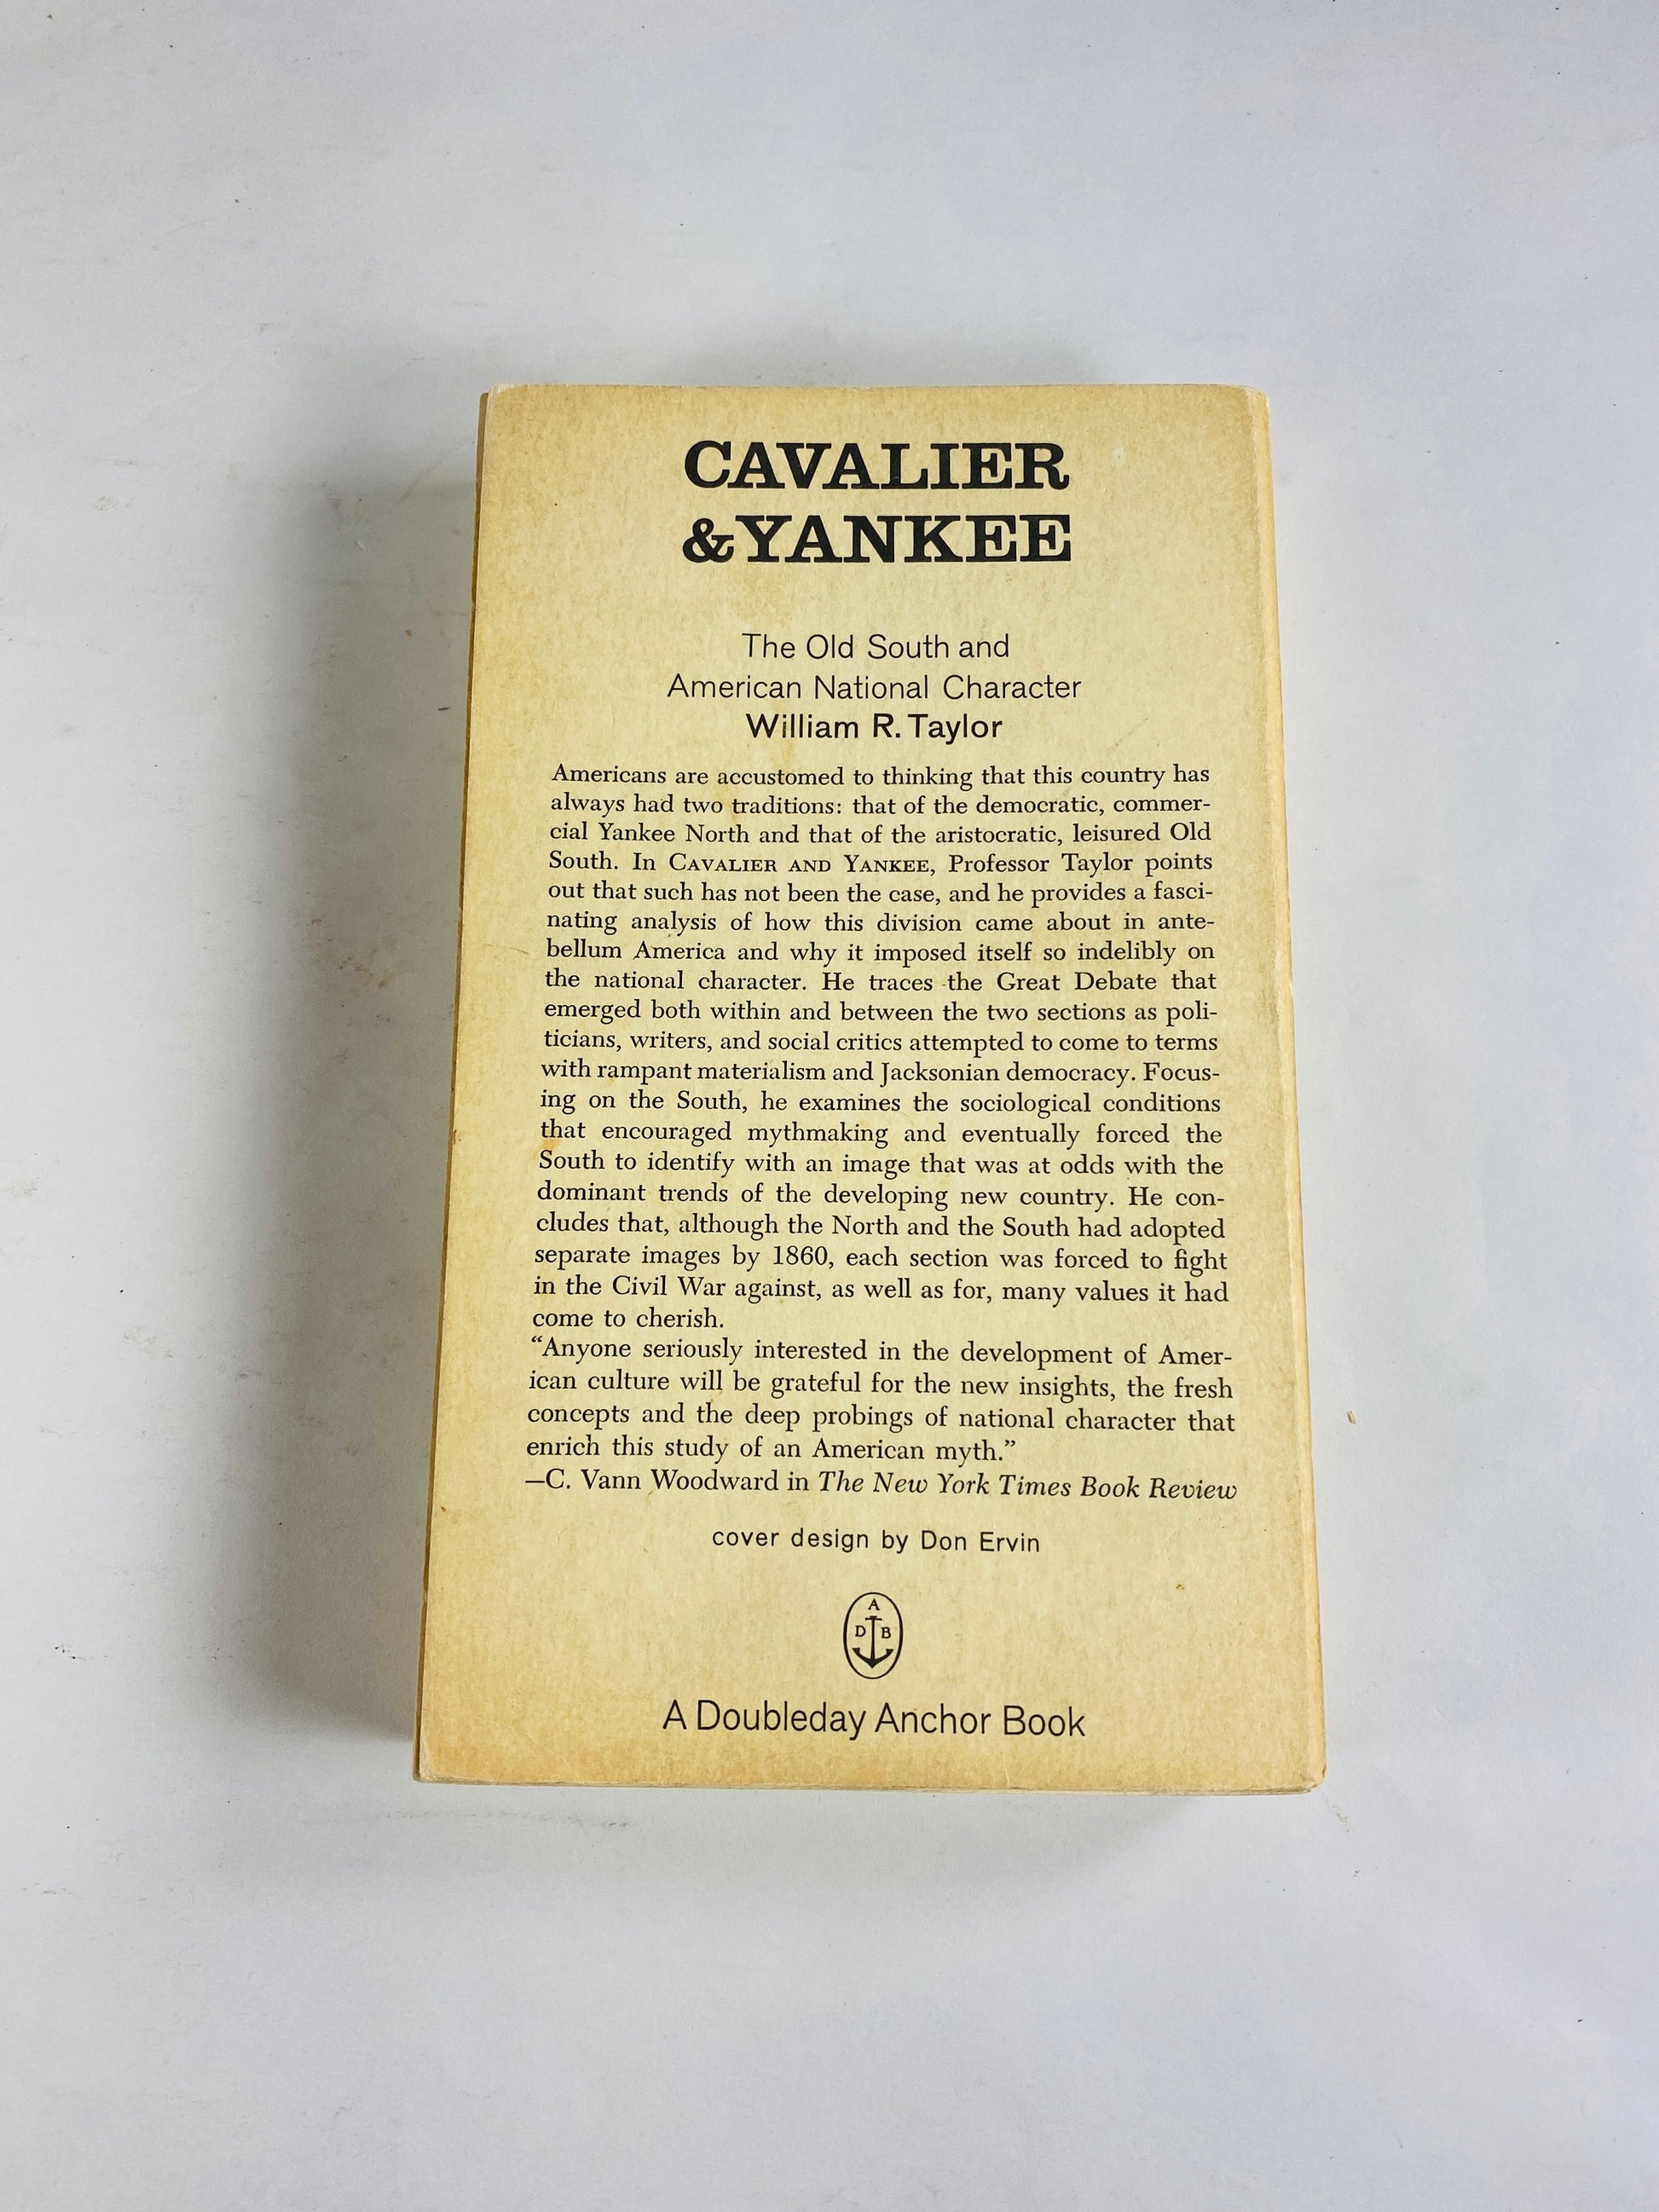 William Taylor's Cavalier and Yankee vintage paperback book about the history and perception of the South before the Civil War.